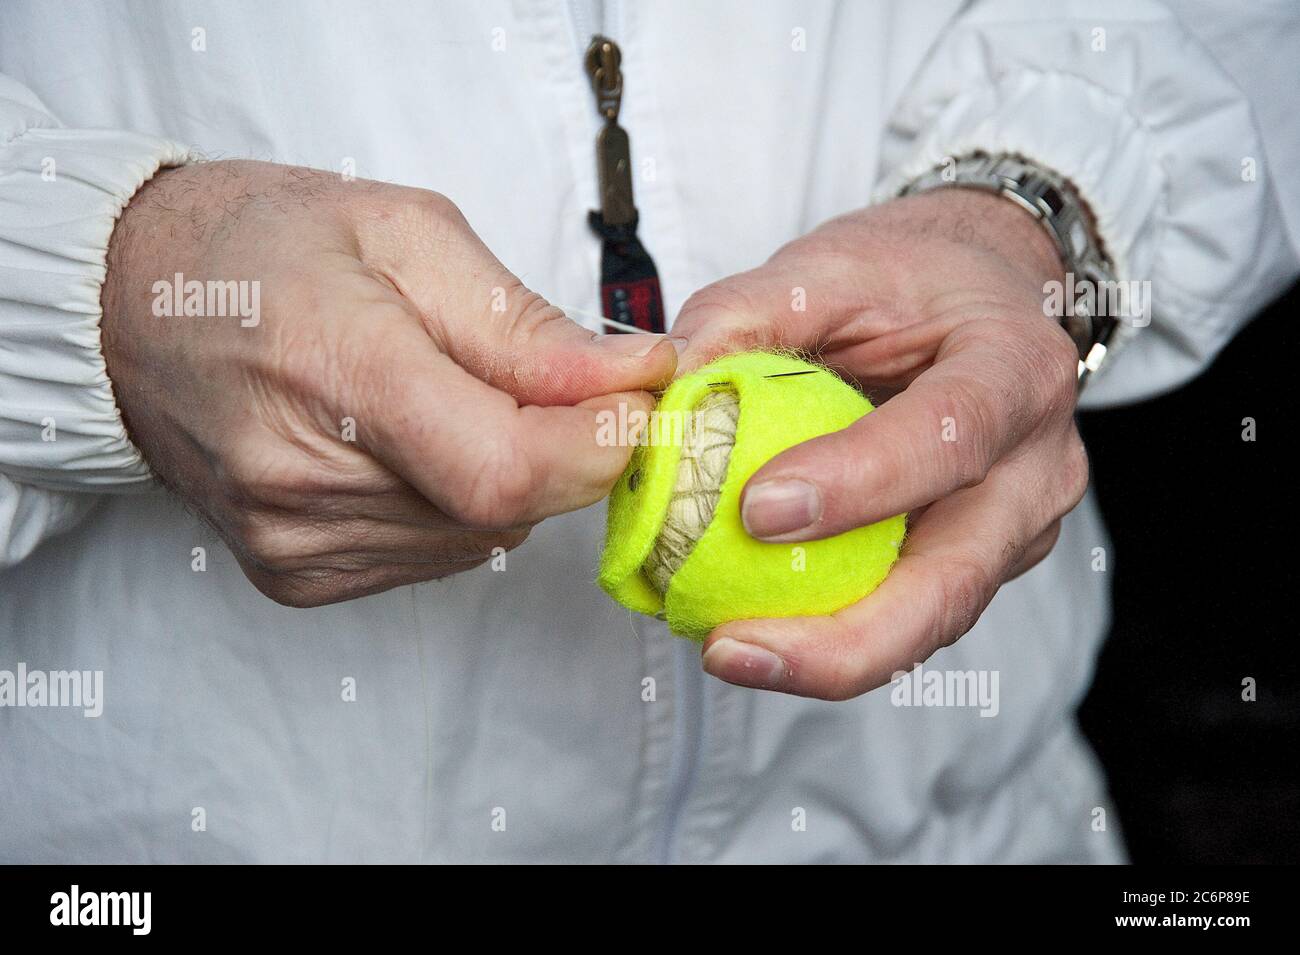 sewing real tennis ball Stock Photo